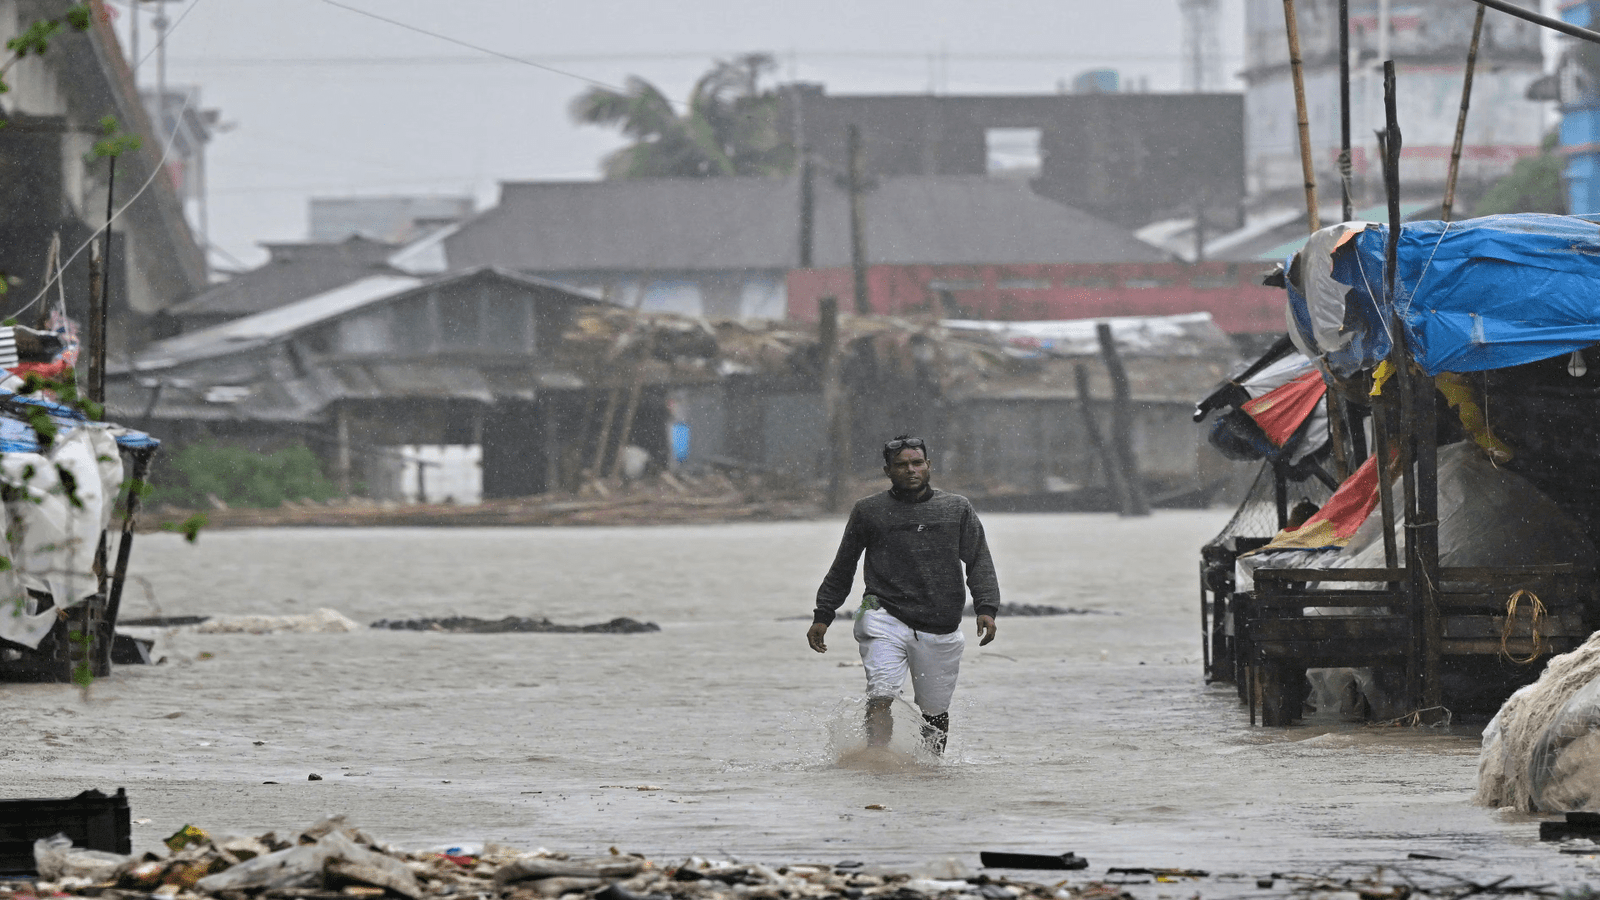 Cyclone kills 16 in India, Bangladesh as power outages abound